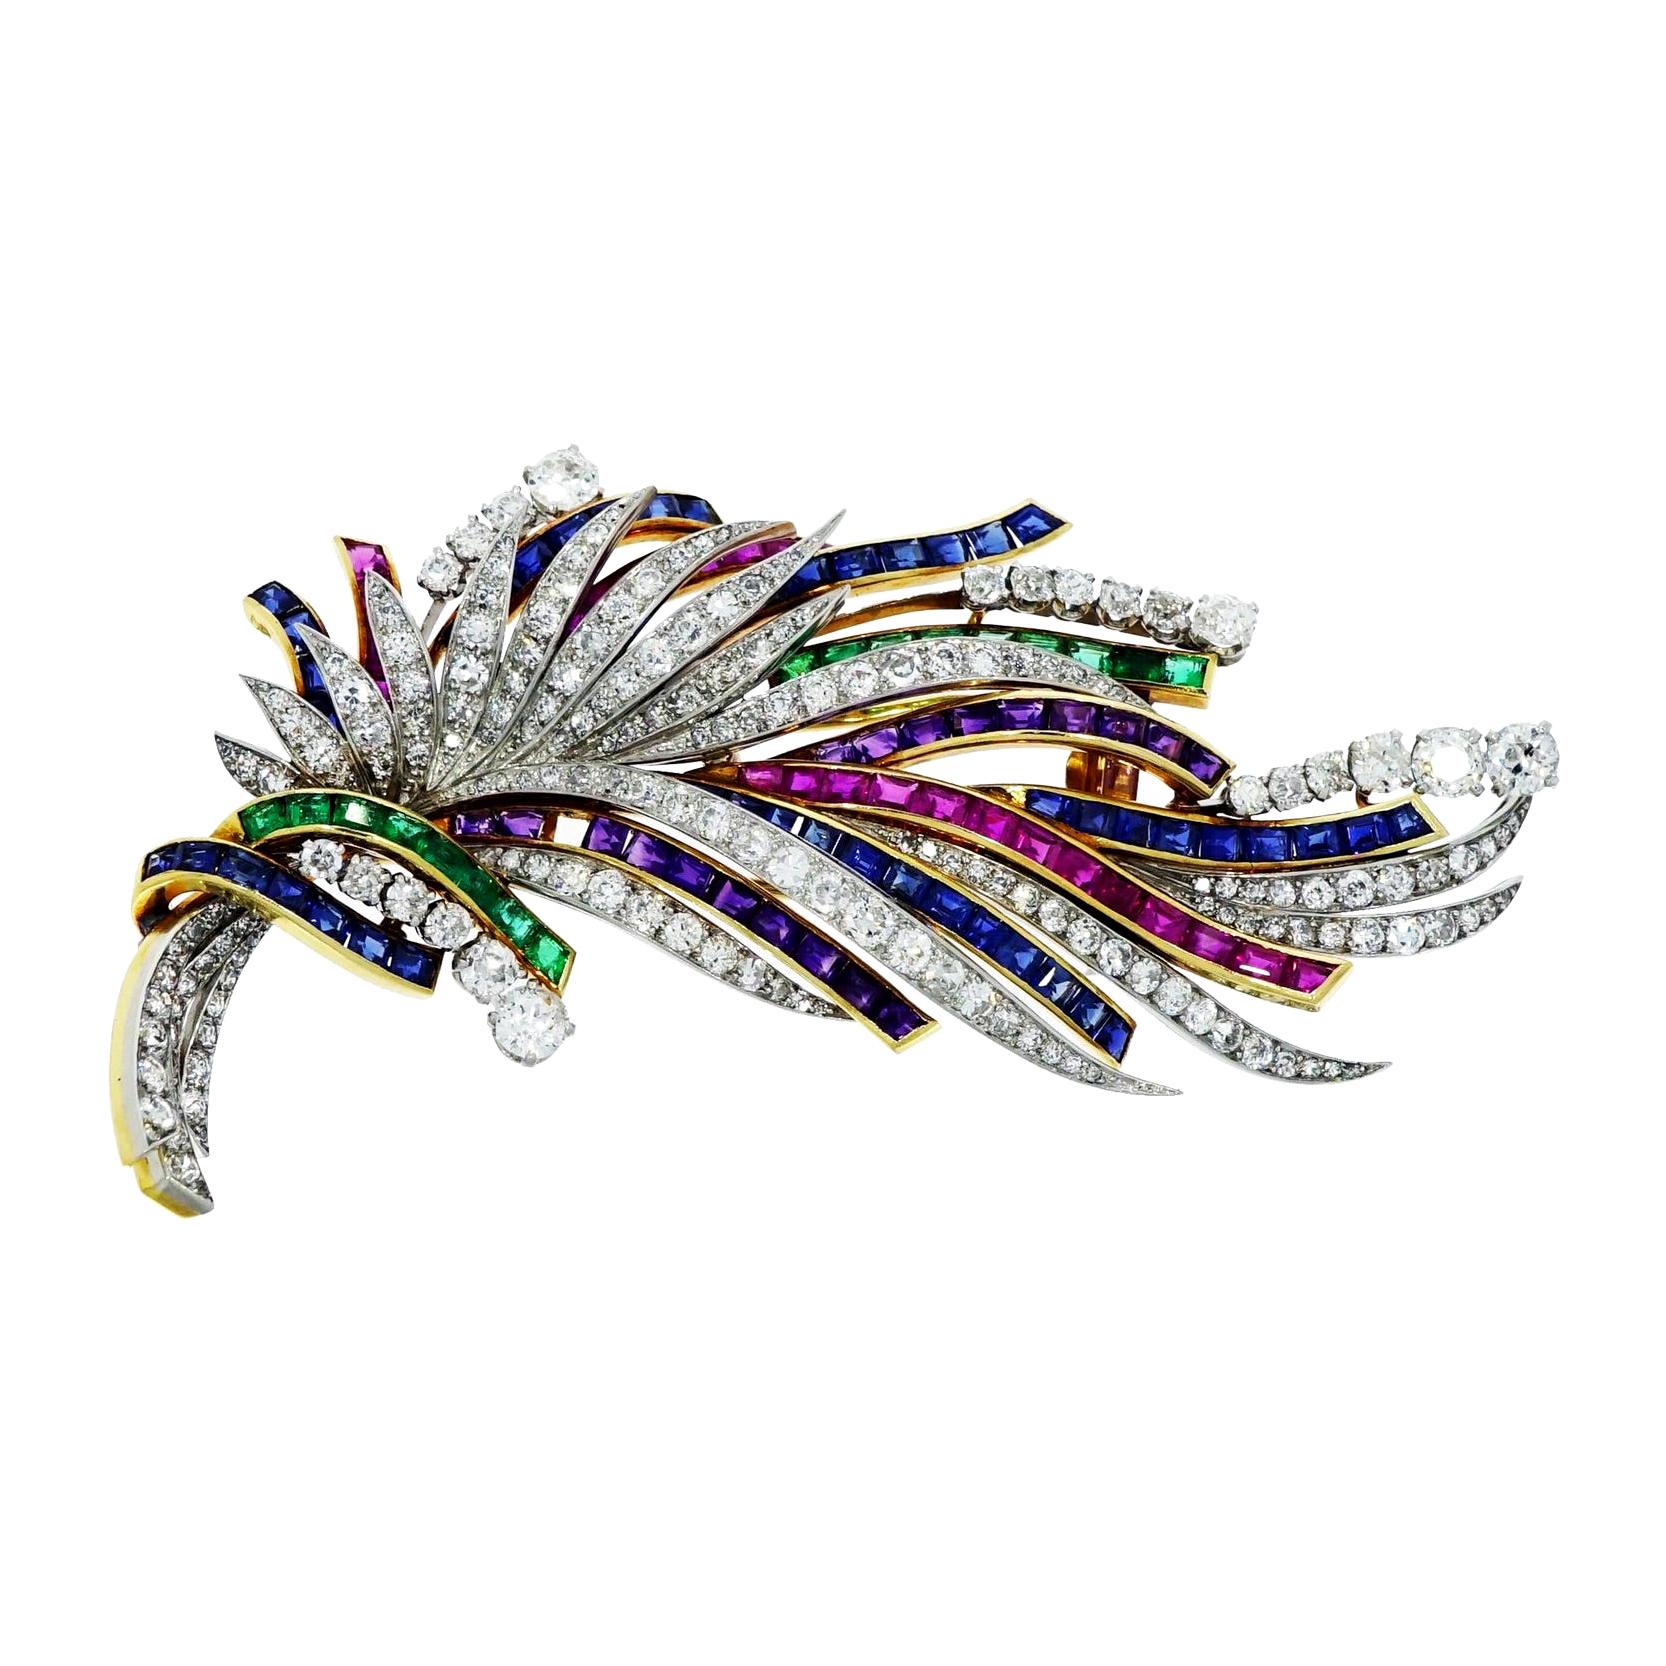 This Gorgeous ribbons and feathers like design vintage brooch... Handcrafted by Boucheron (Paris) in 18k Yellow and White Gold.
Decorated with princess cut sapphires, rubies, emeralds and amethyst mixed in with white round diamonds displaying lively